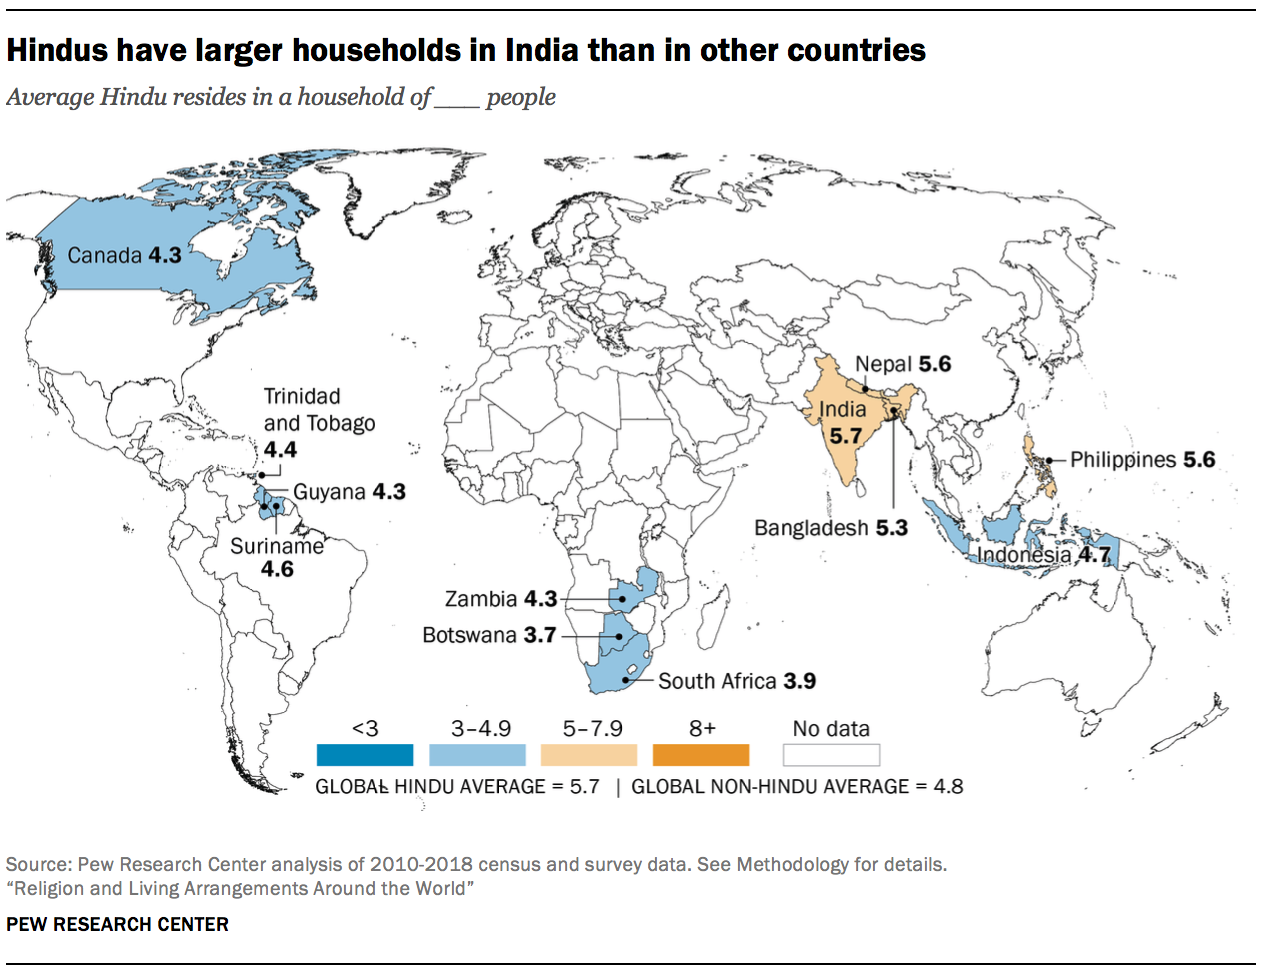 Hindus have larger households in India than in other countries